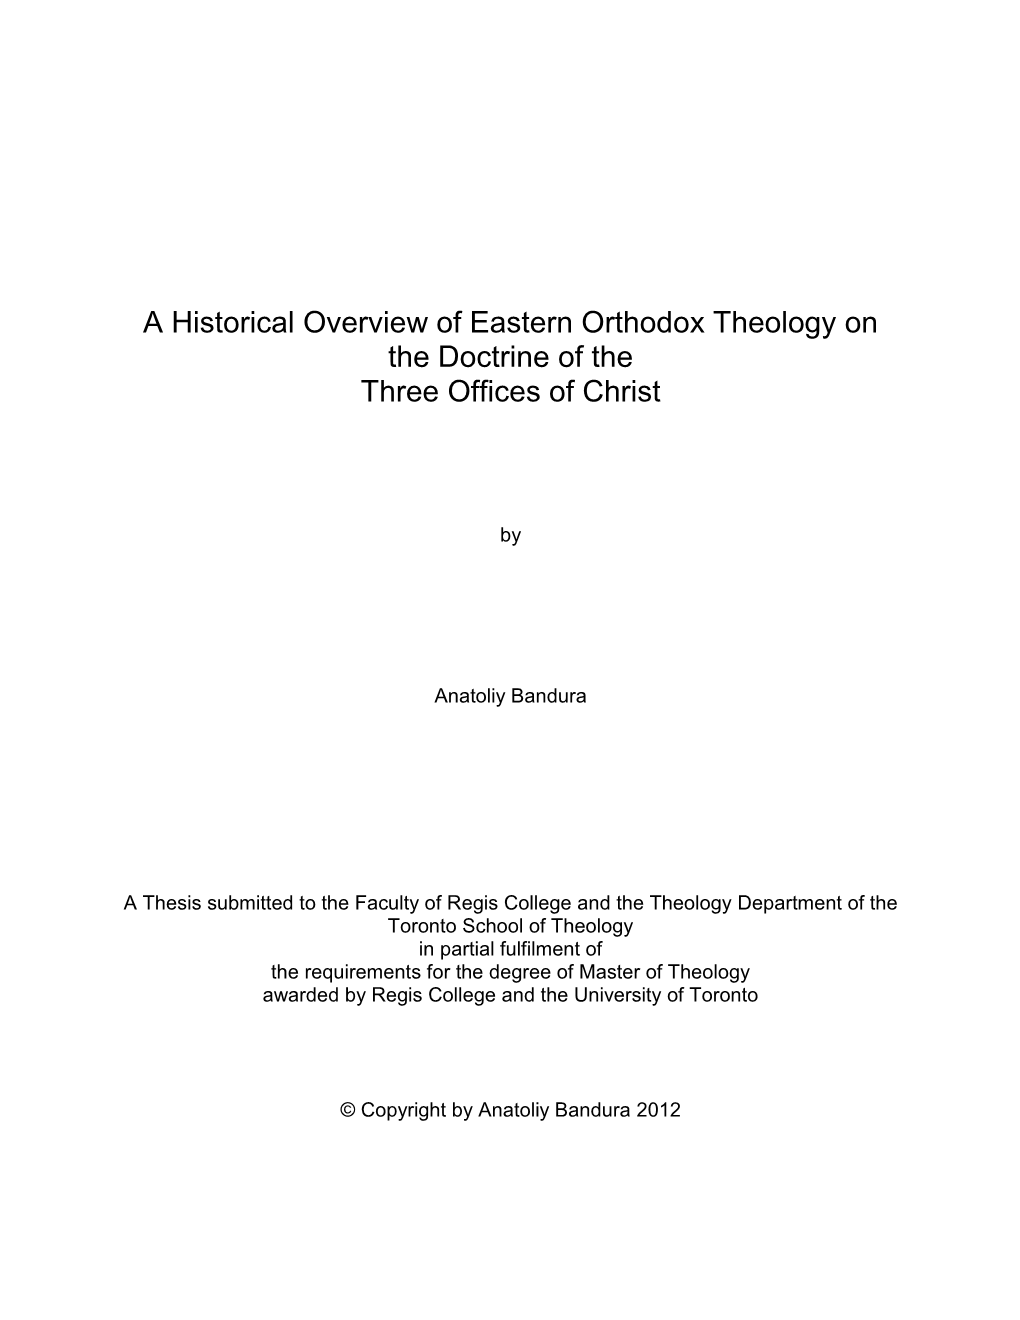 A Historical Overview of Eastern Orthodox Theology on the Doctrine of the Three Offices of Christ